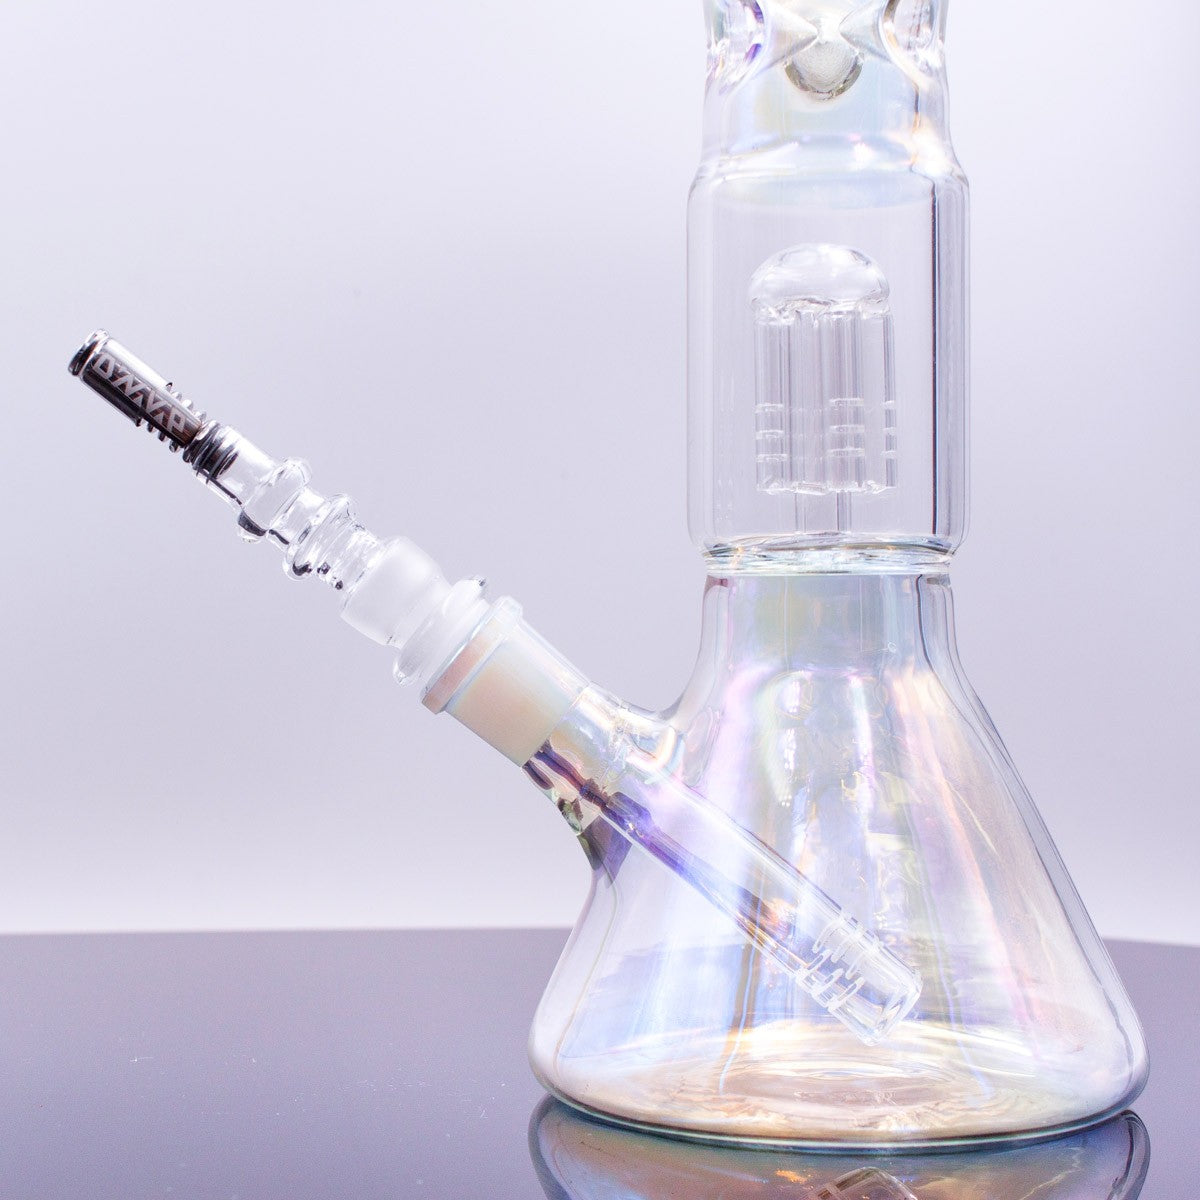 Universal Glass Adapter for DynaVap at The Stash Shack, side view on reflective surface